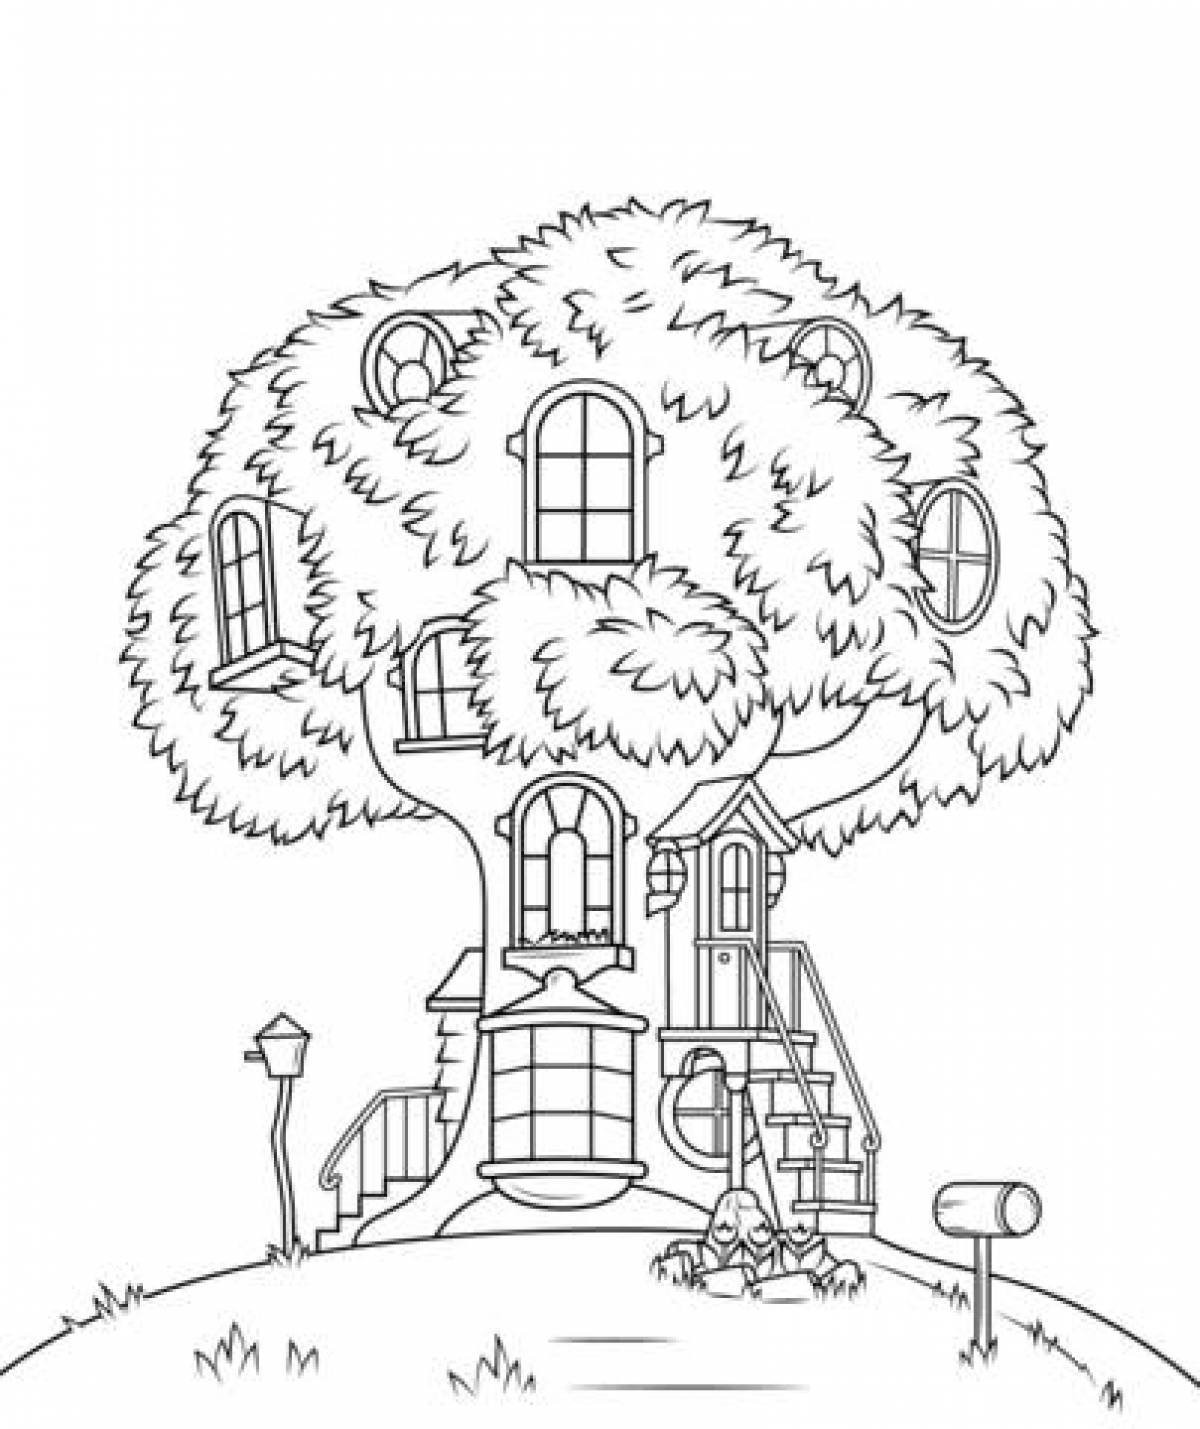 Tree house coloring page